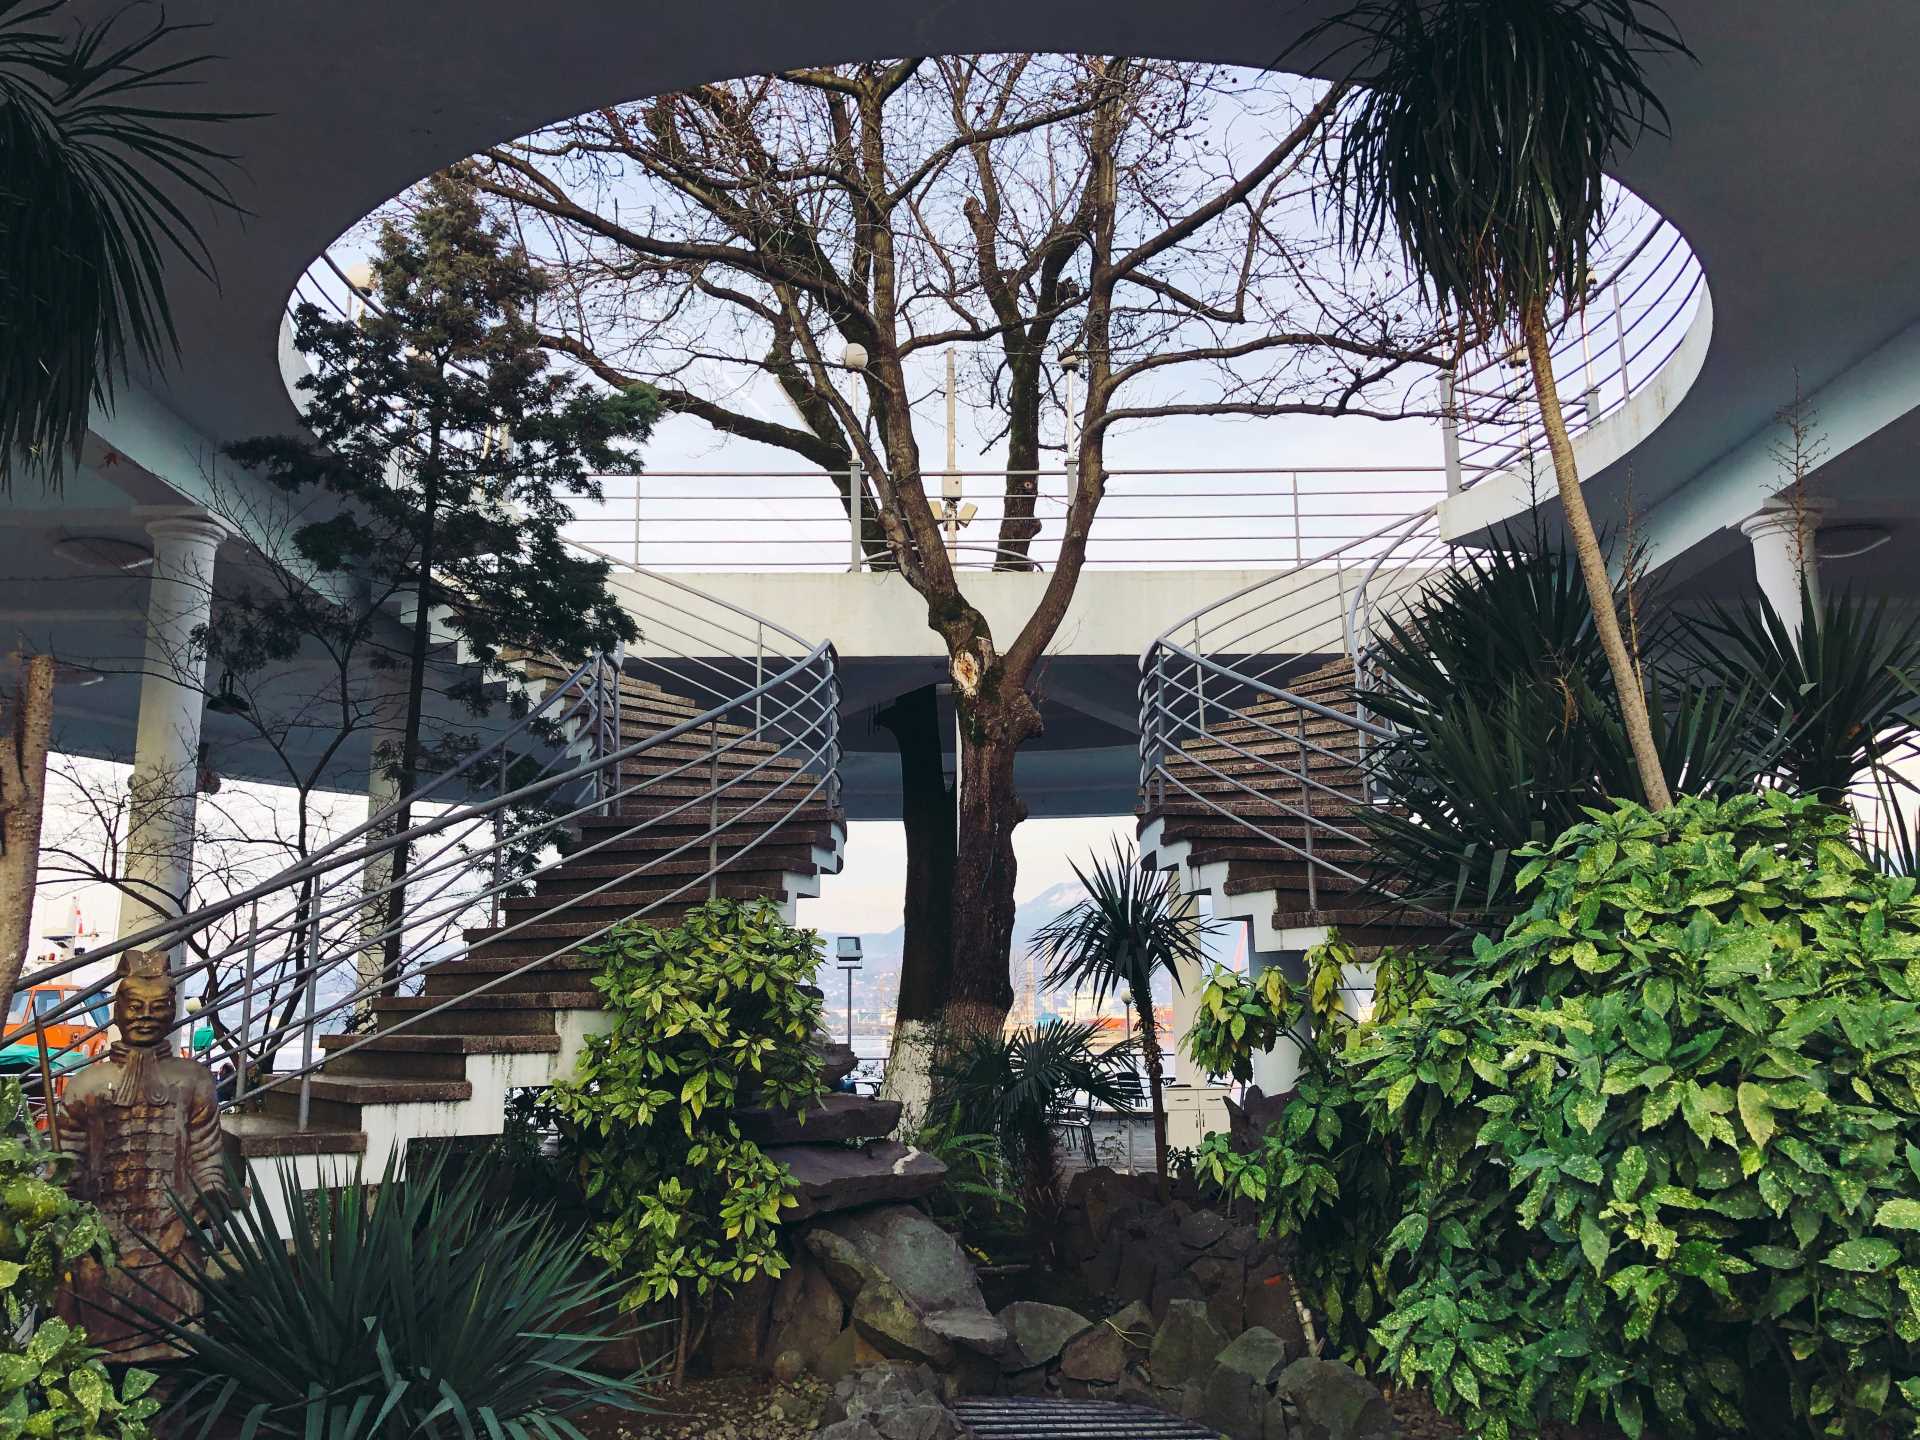 Modern building with spiral staircases and lots of plants | Featured image for the Biophilia Design – a Guide to Natural Home Design Concepts blog from Clements Clarke Architects.